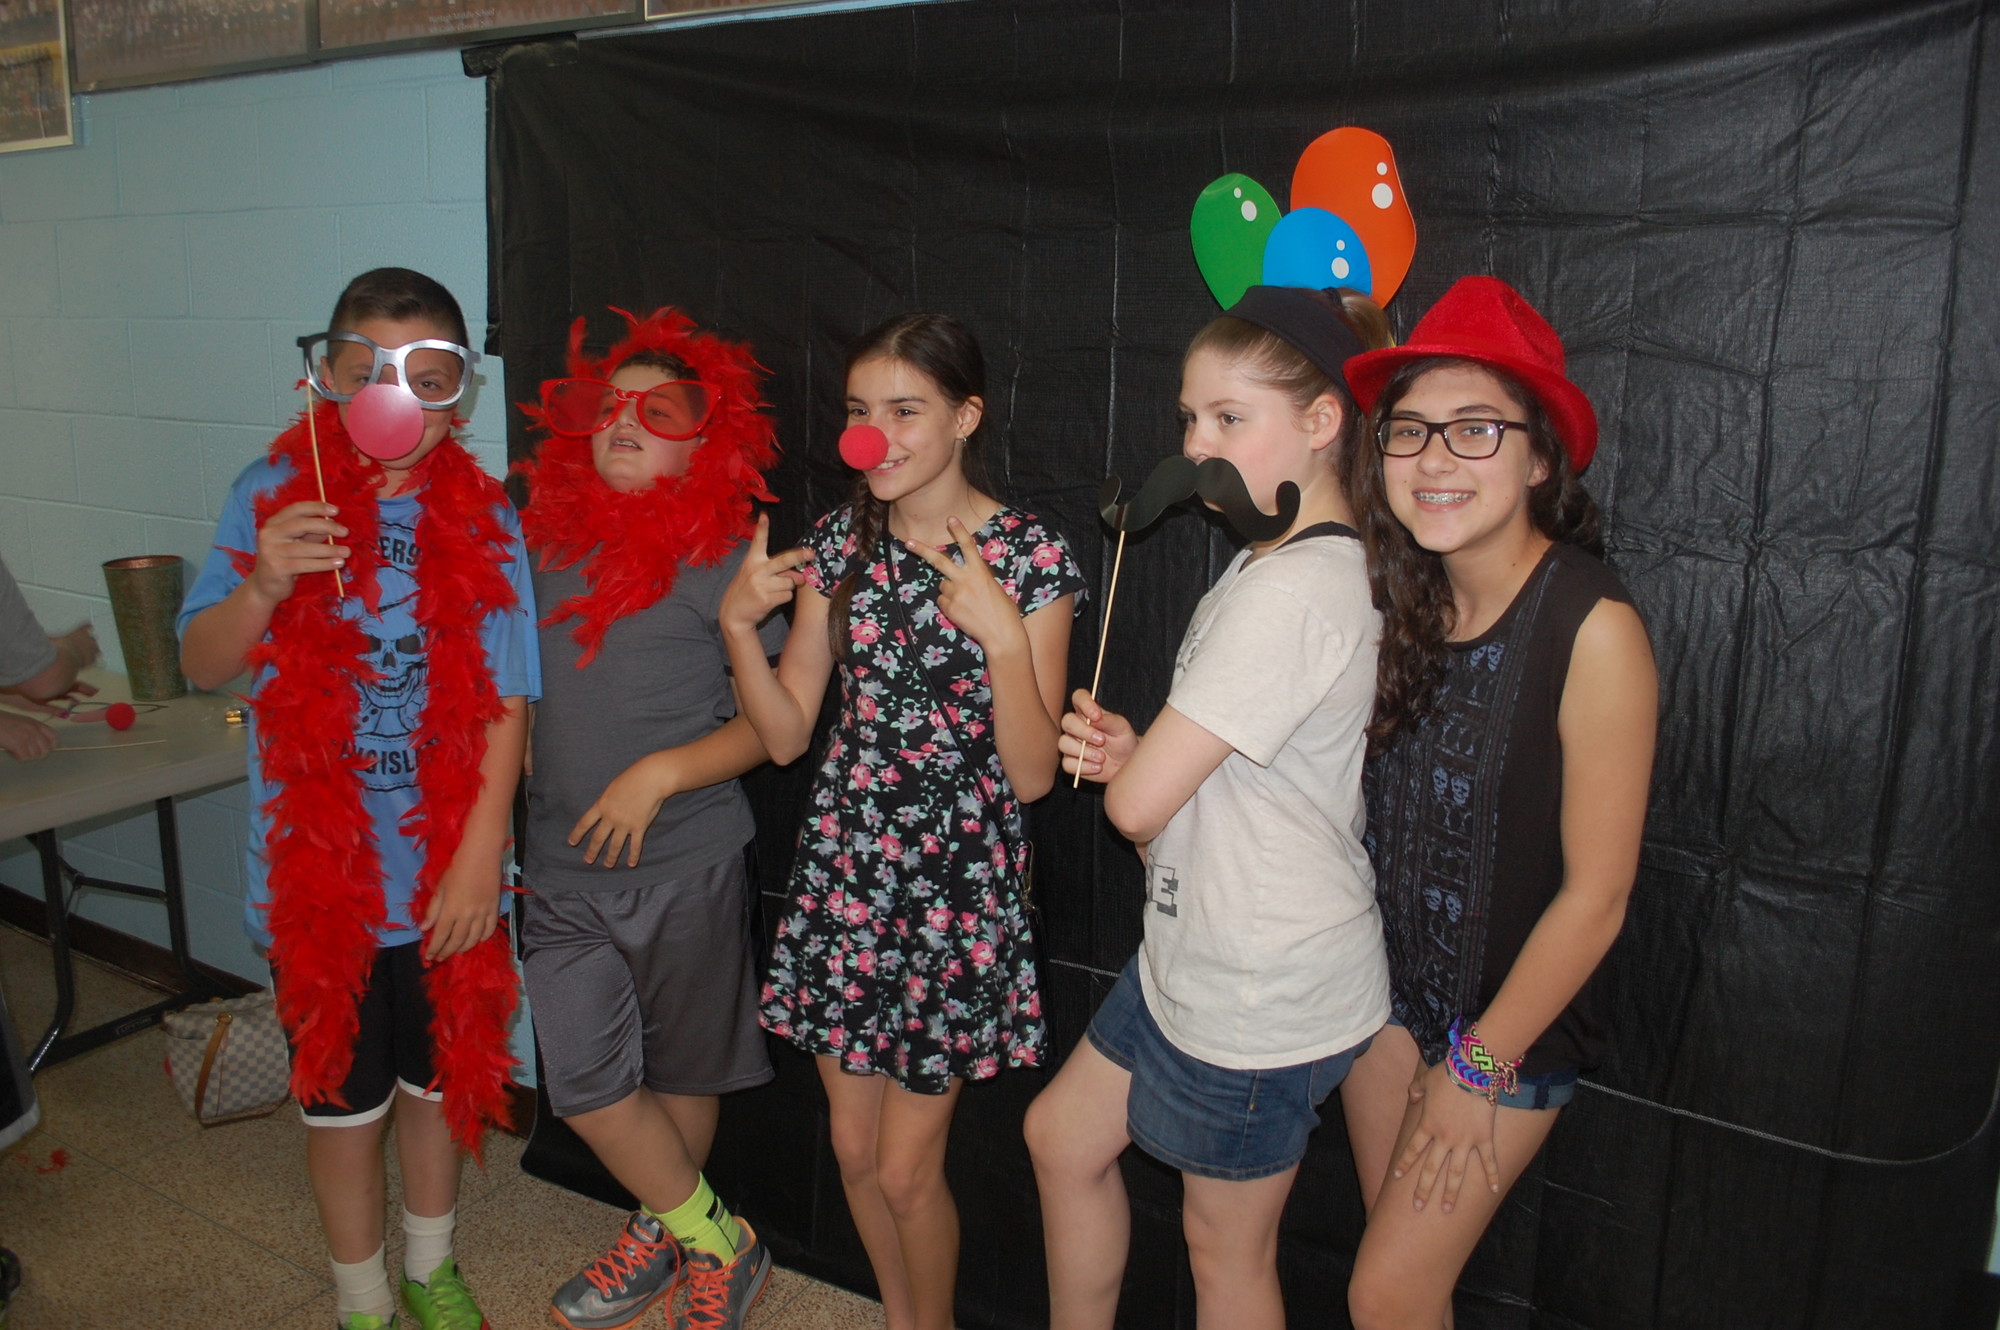 Wantagh Middle School students used props to take comical pictures as a fundraiser for Red Nose Day on May 21.